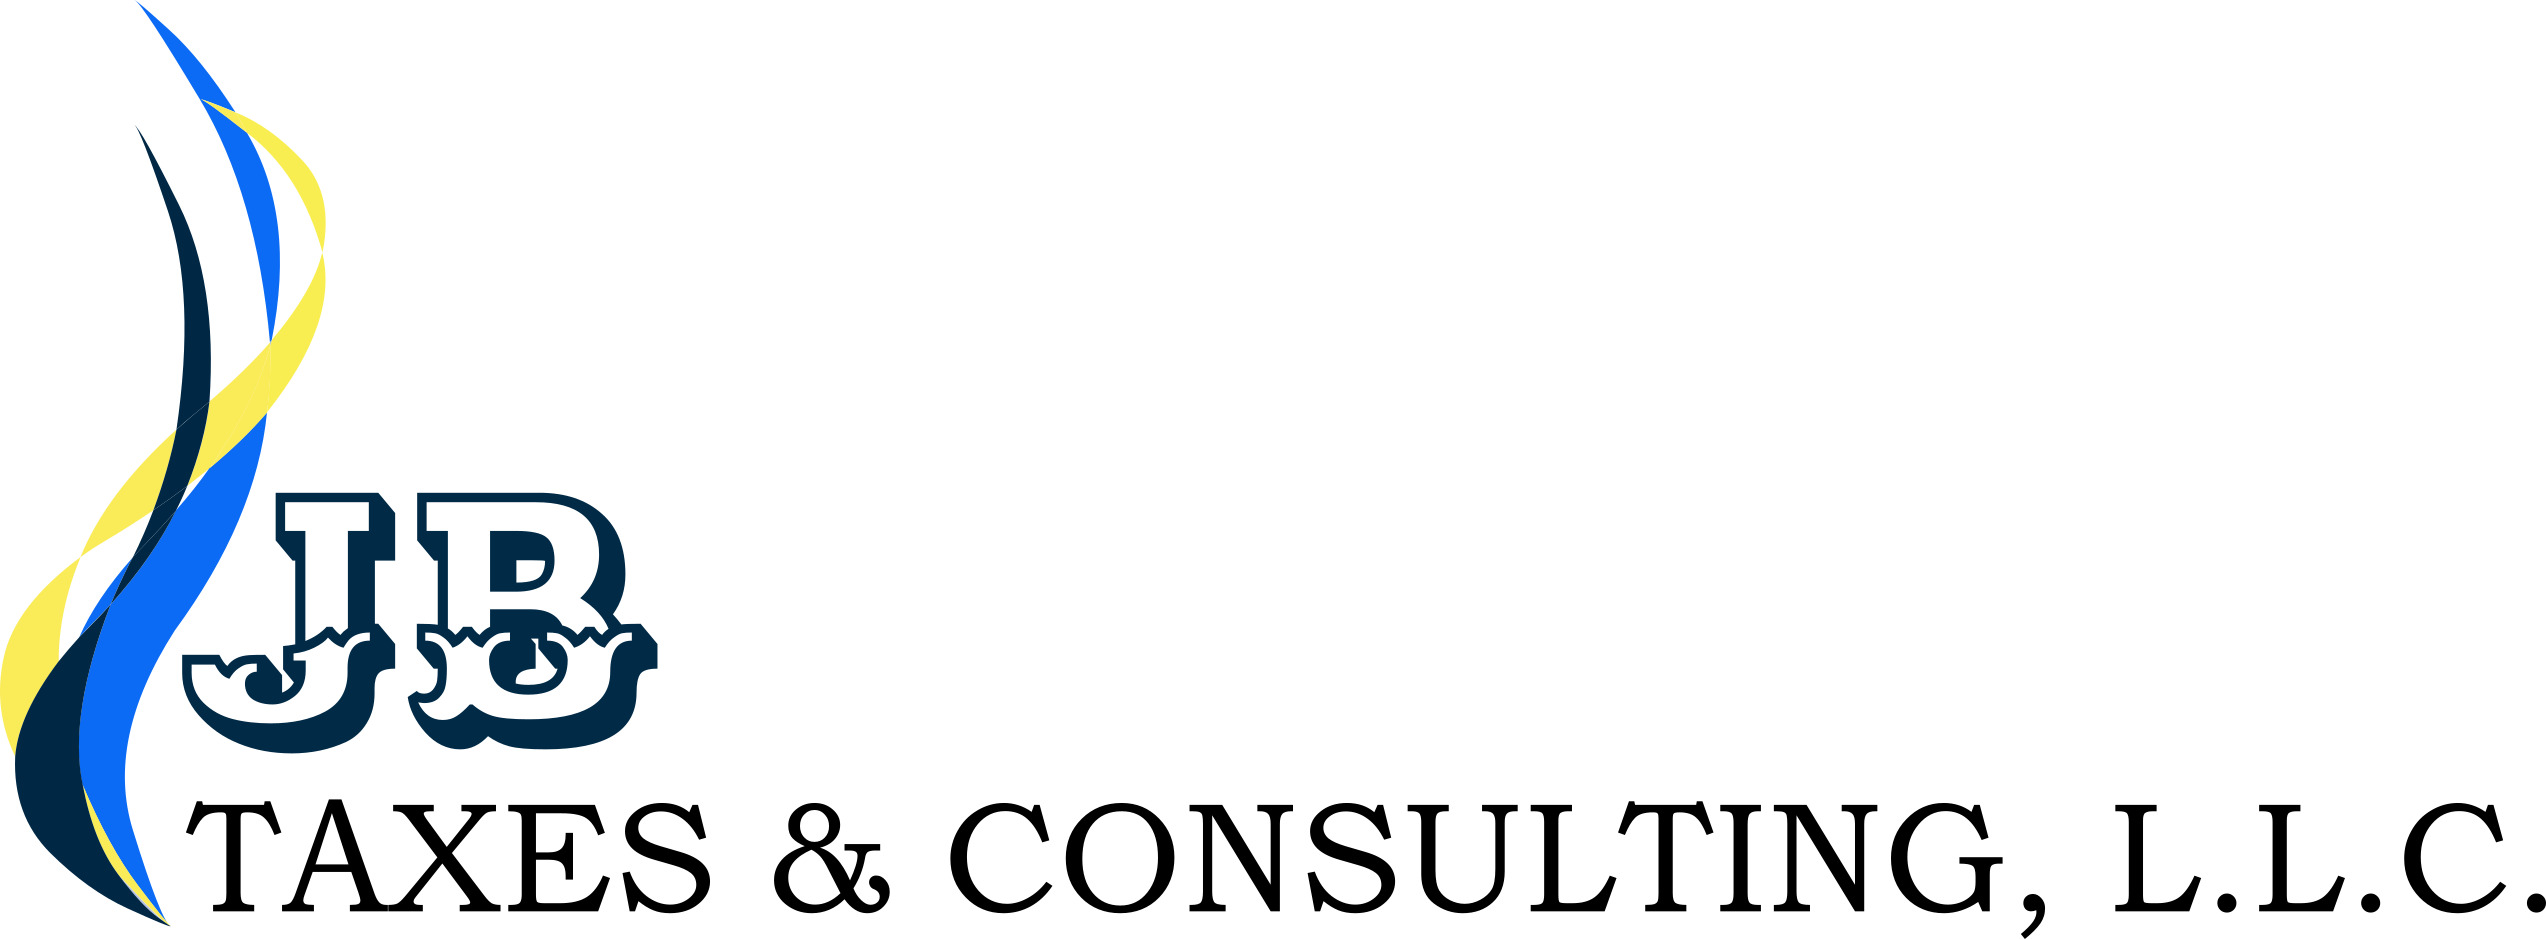 JB Taxes and Consulting